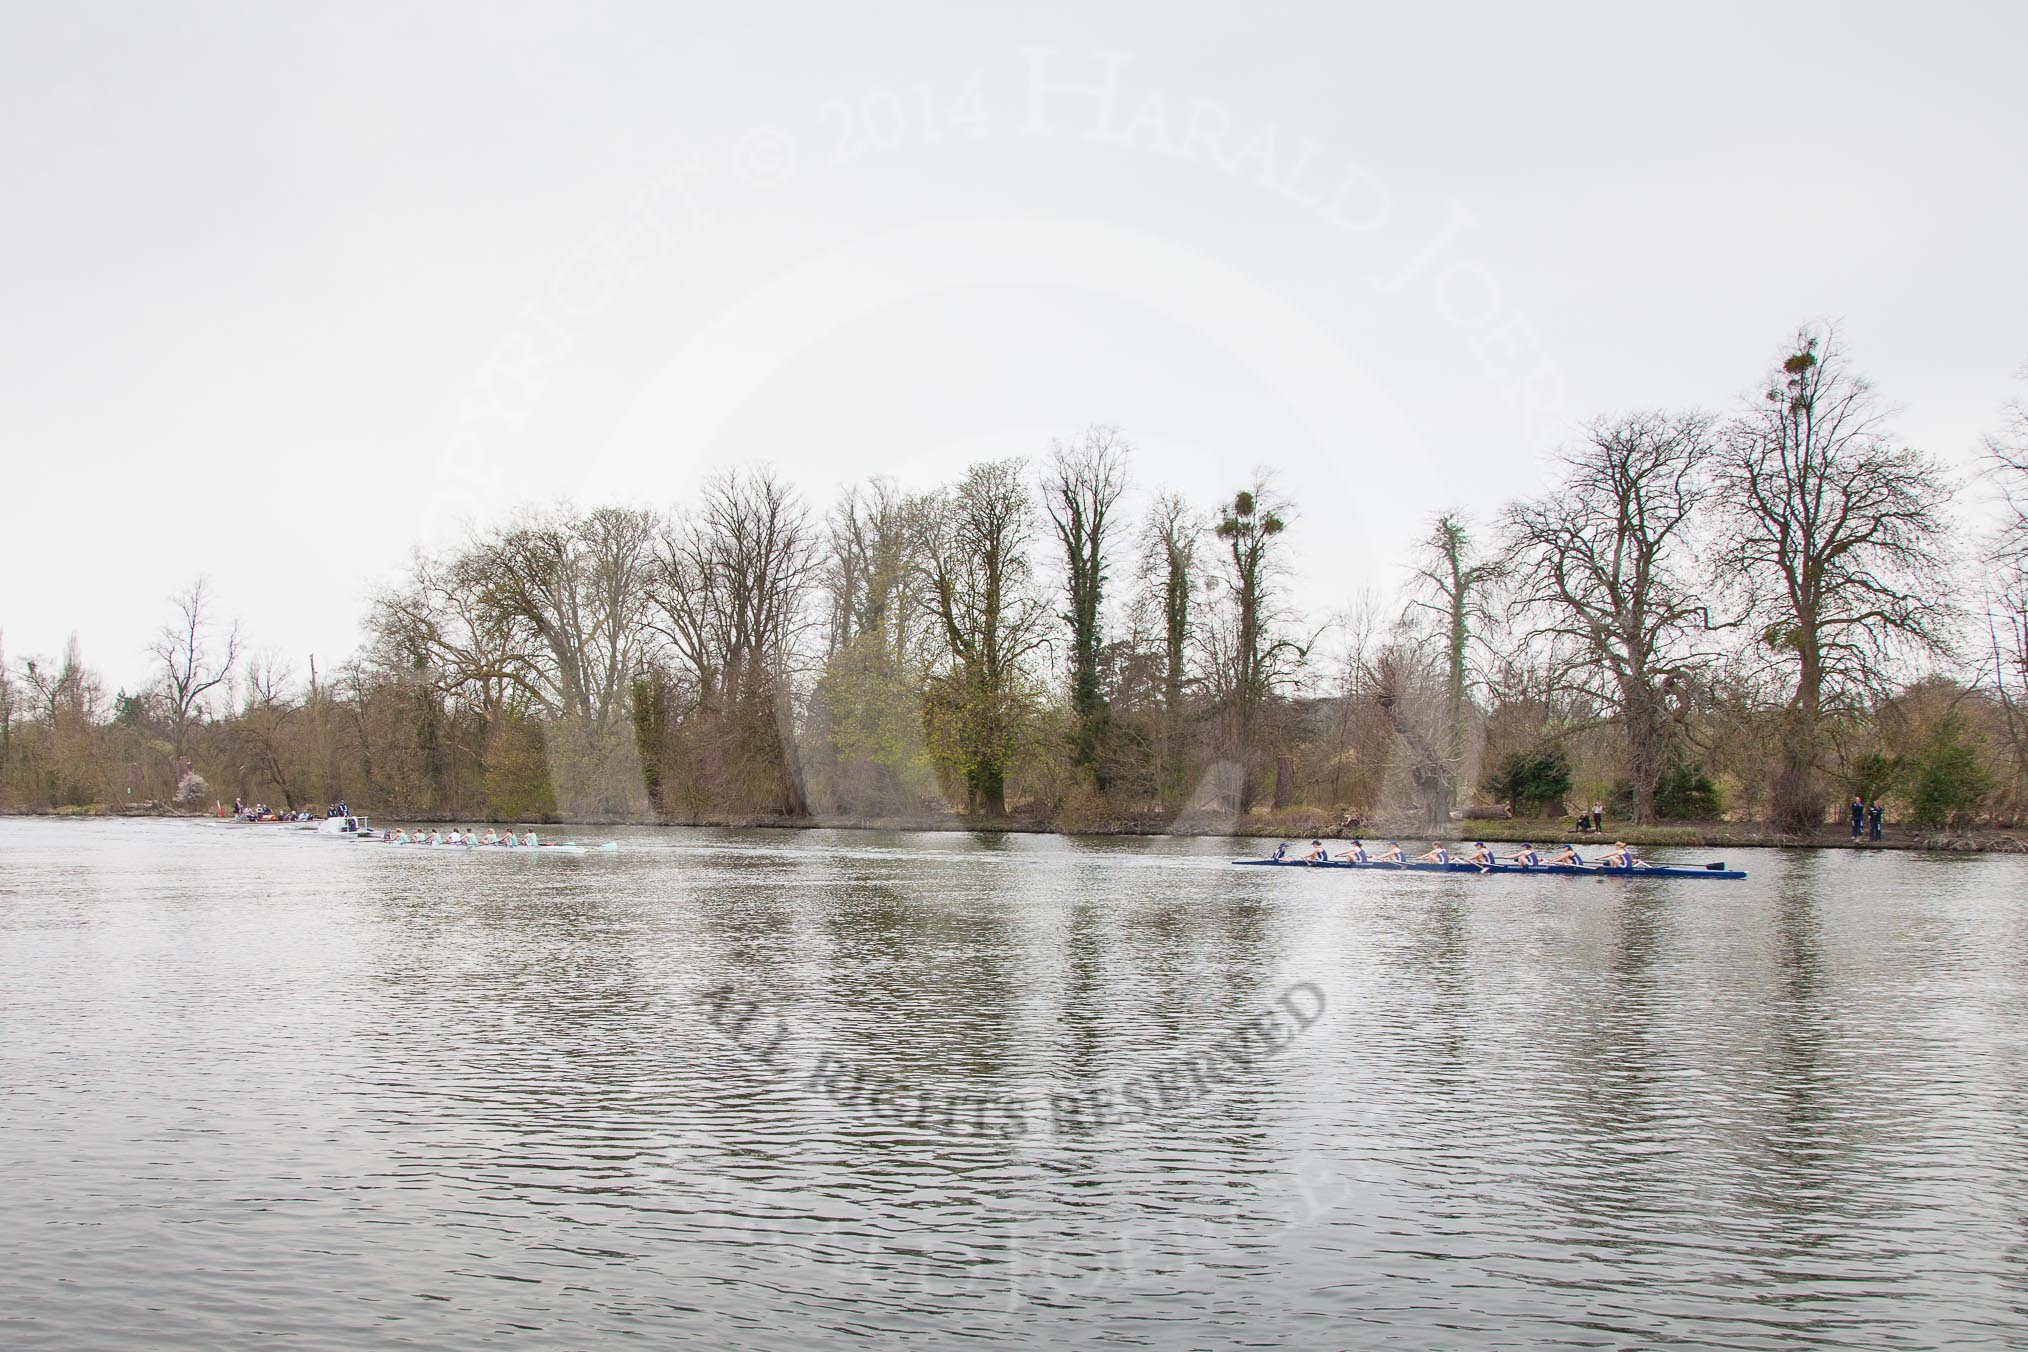 The Women's Boat Race and Henley Boat Races 2014: The Lightweight Women's Boat Race - the OUWLRC is now leading the CUWBC Lightweights by over a length..
River Thames,
Henley-on-Thames,
Buckinghamshire,
United Kingdom,
on 30 March 2014 at 14:49, image #228